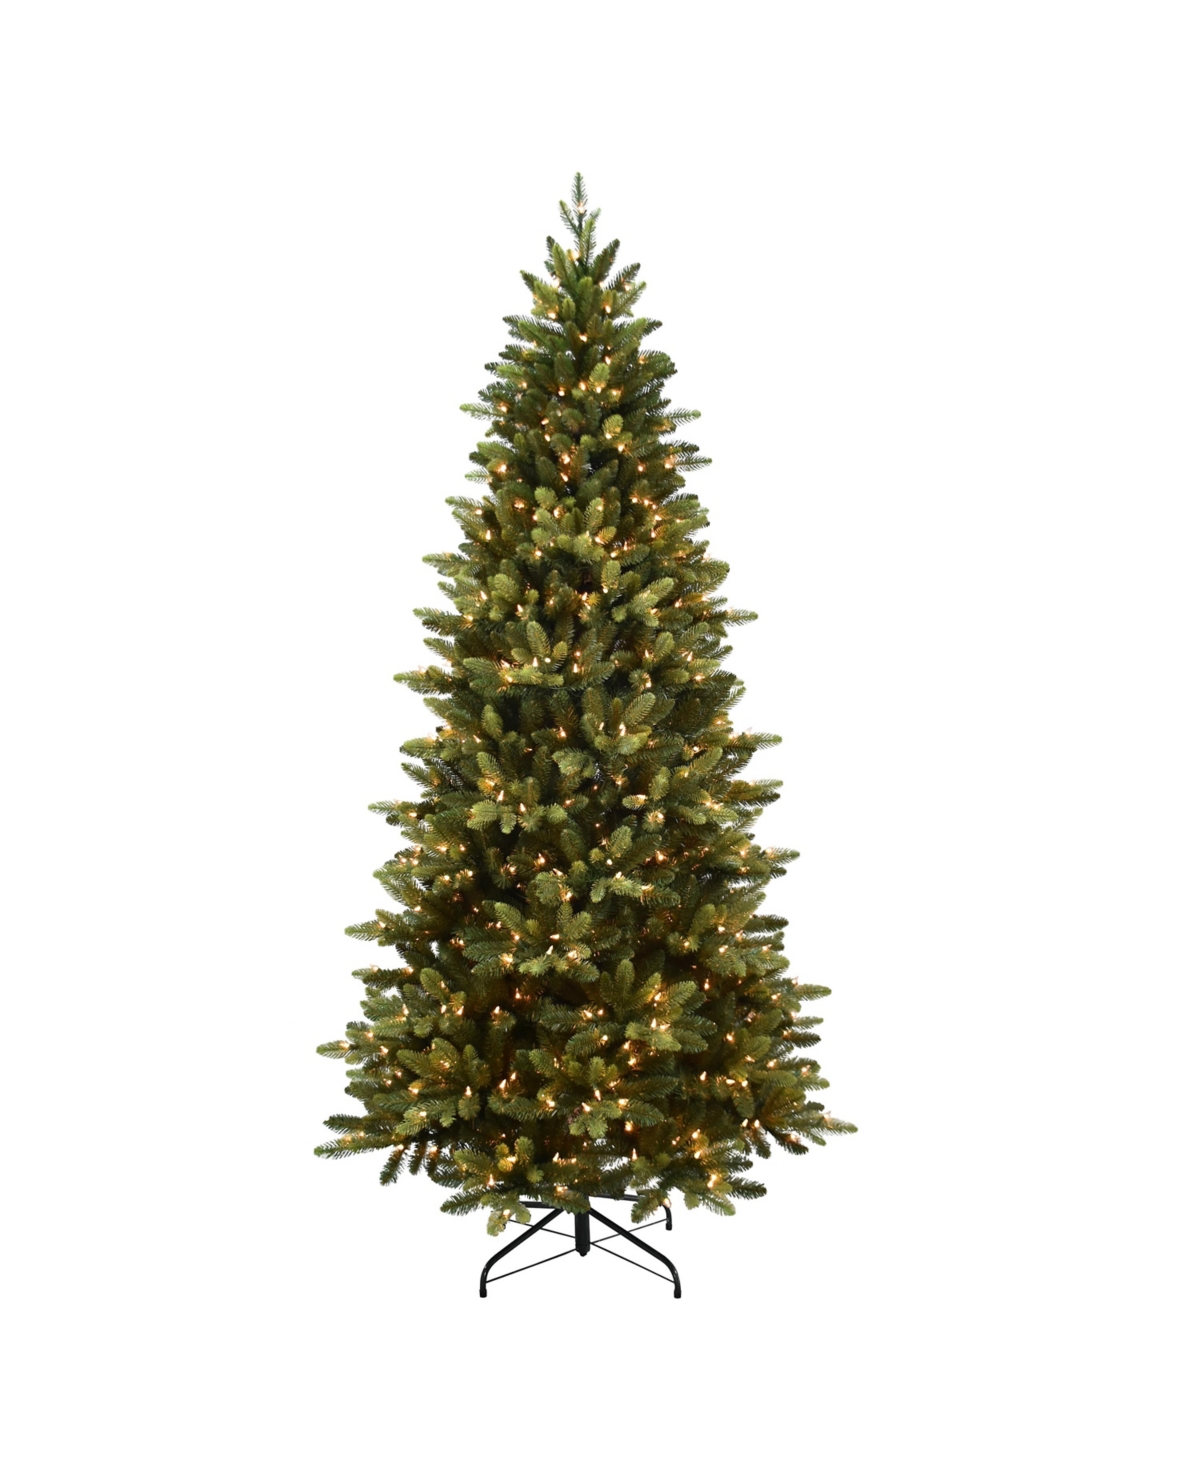 Puleo 6.5' Pre-lit Slim Westford Spruce Tree With 350 Underwriters Laboratories Clear Incandescent Lights, In Green